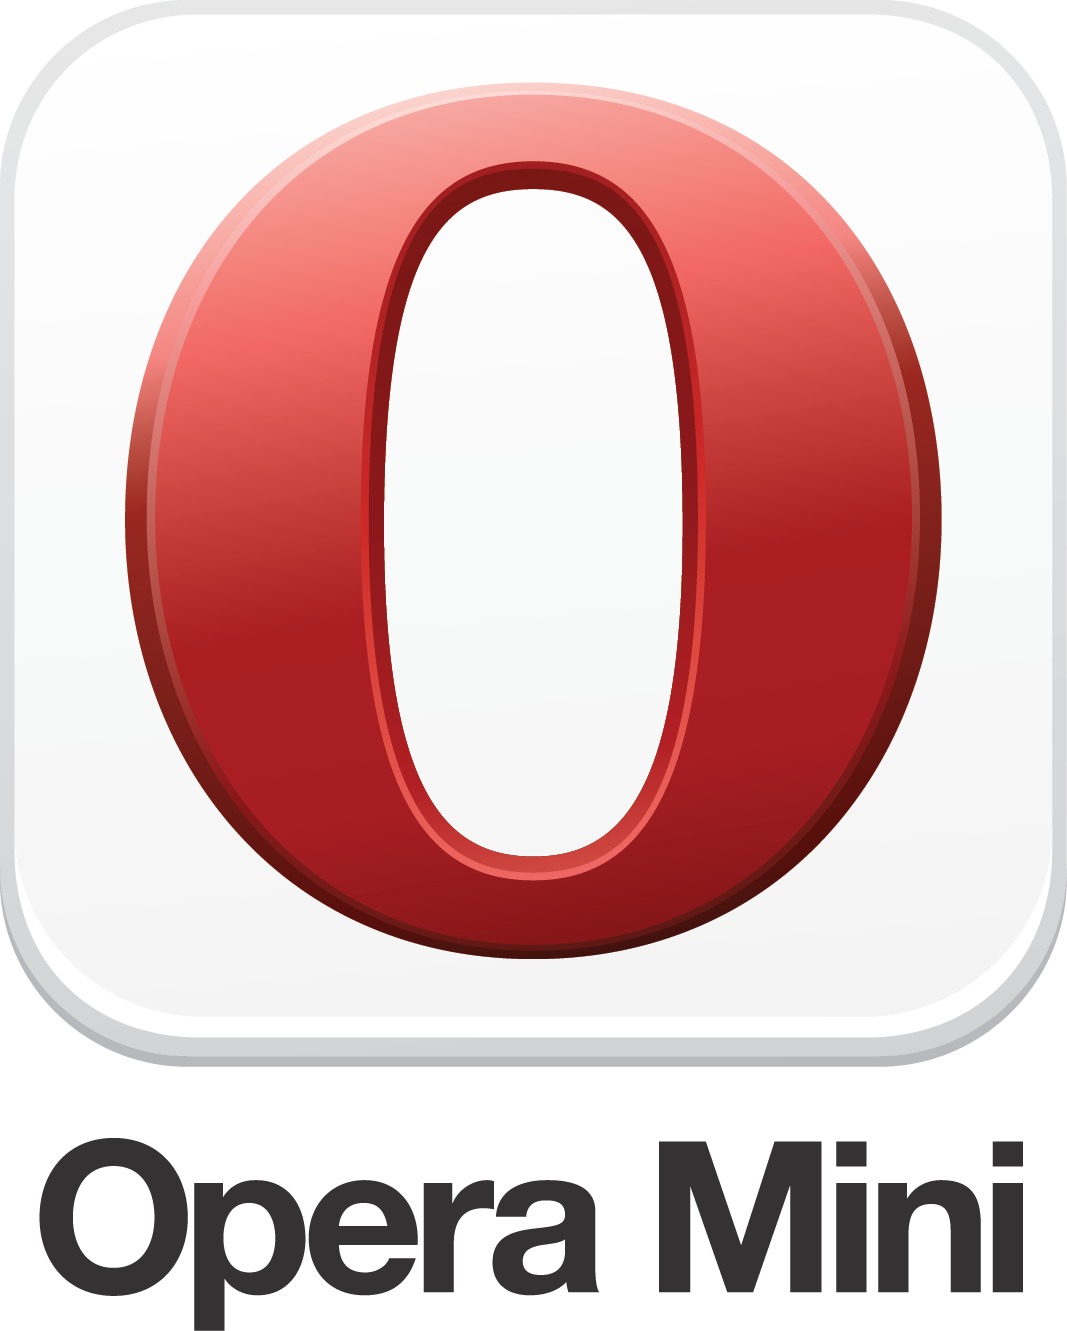 Free Download Opera Mini Browser For China Mobile - Vinotree